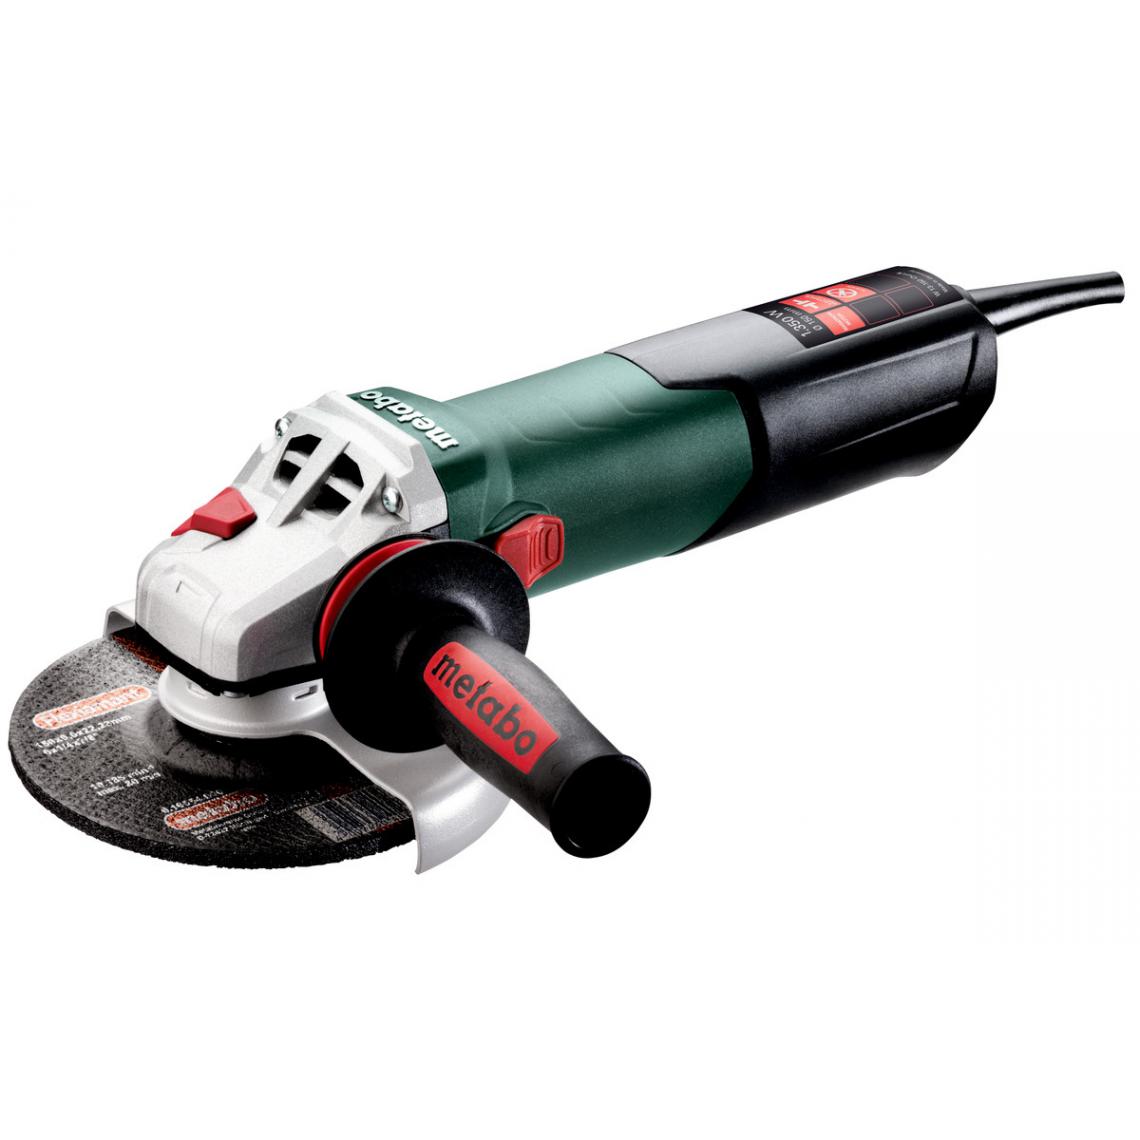 Metabo - Meuleuse Ø150 mm filaire W 13-150 QUICK METABO - 603632000 - Meuleuses